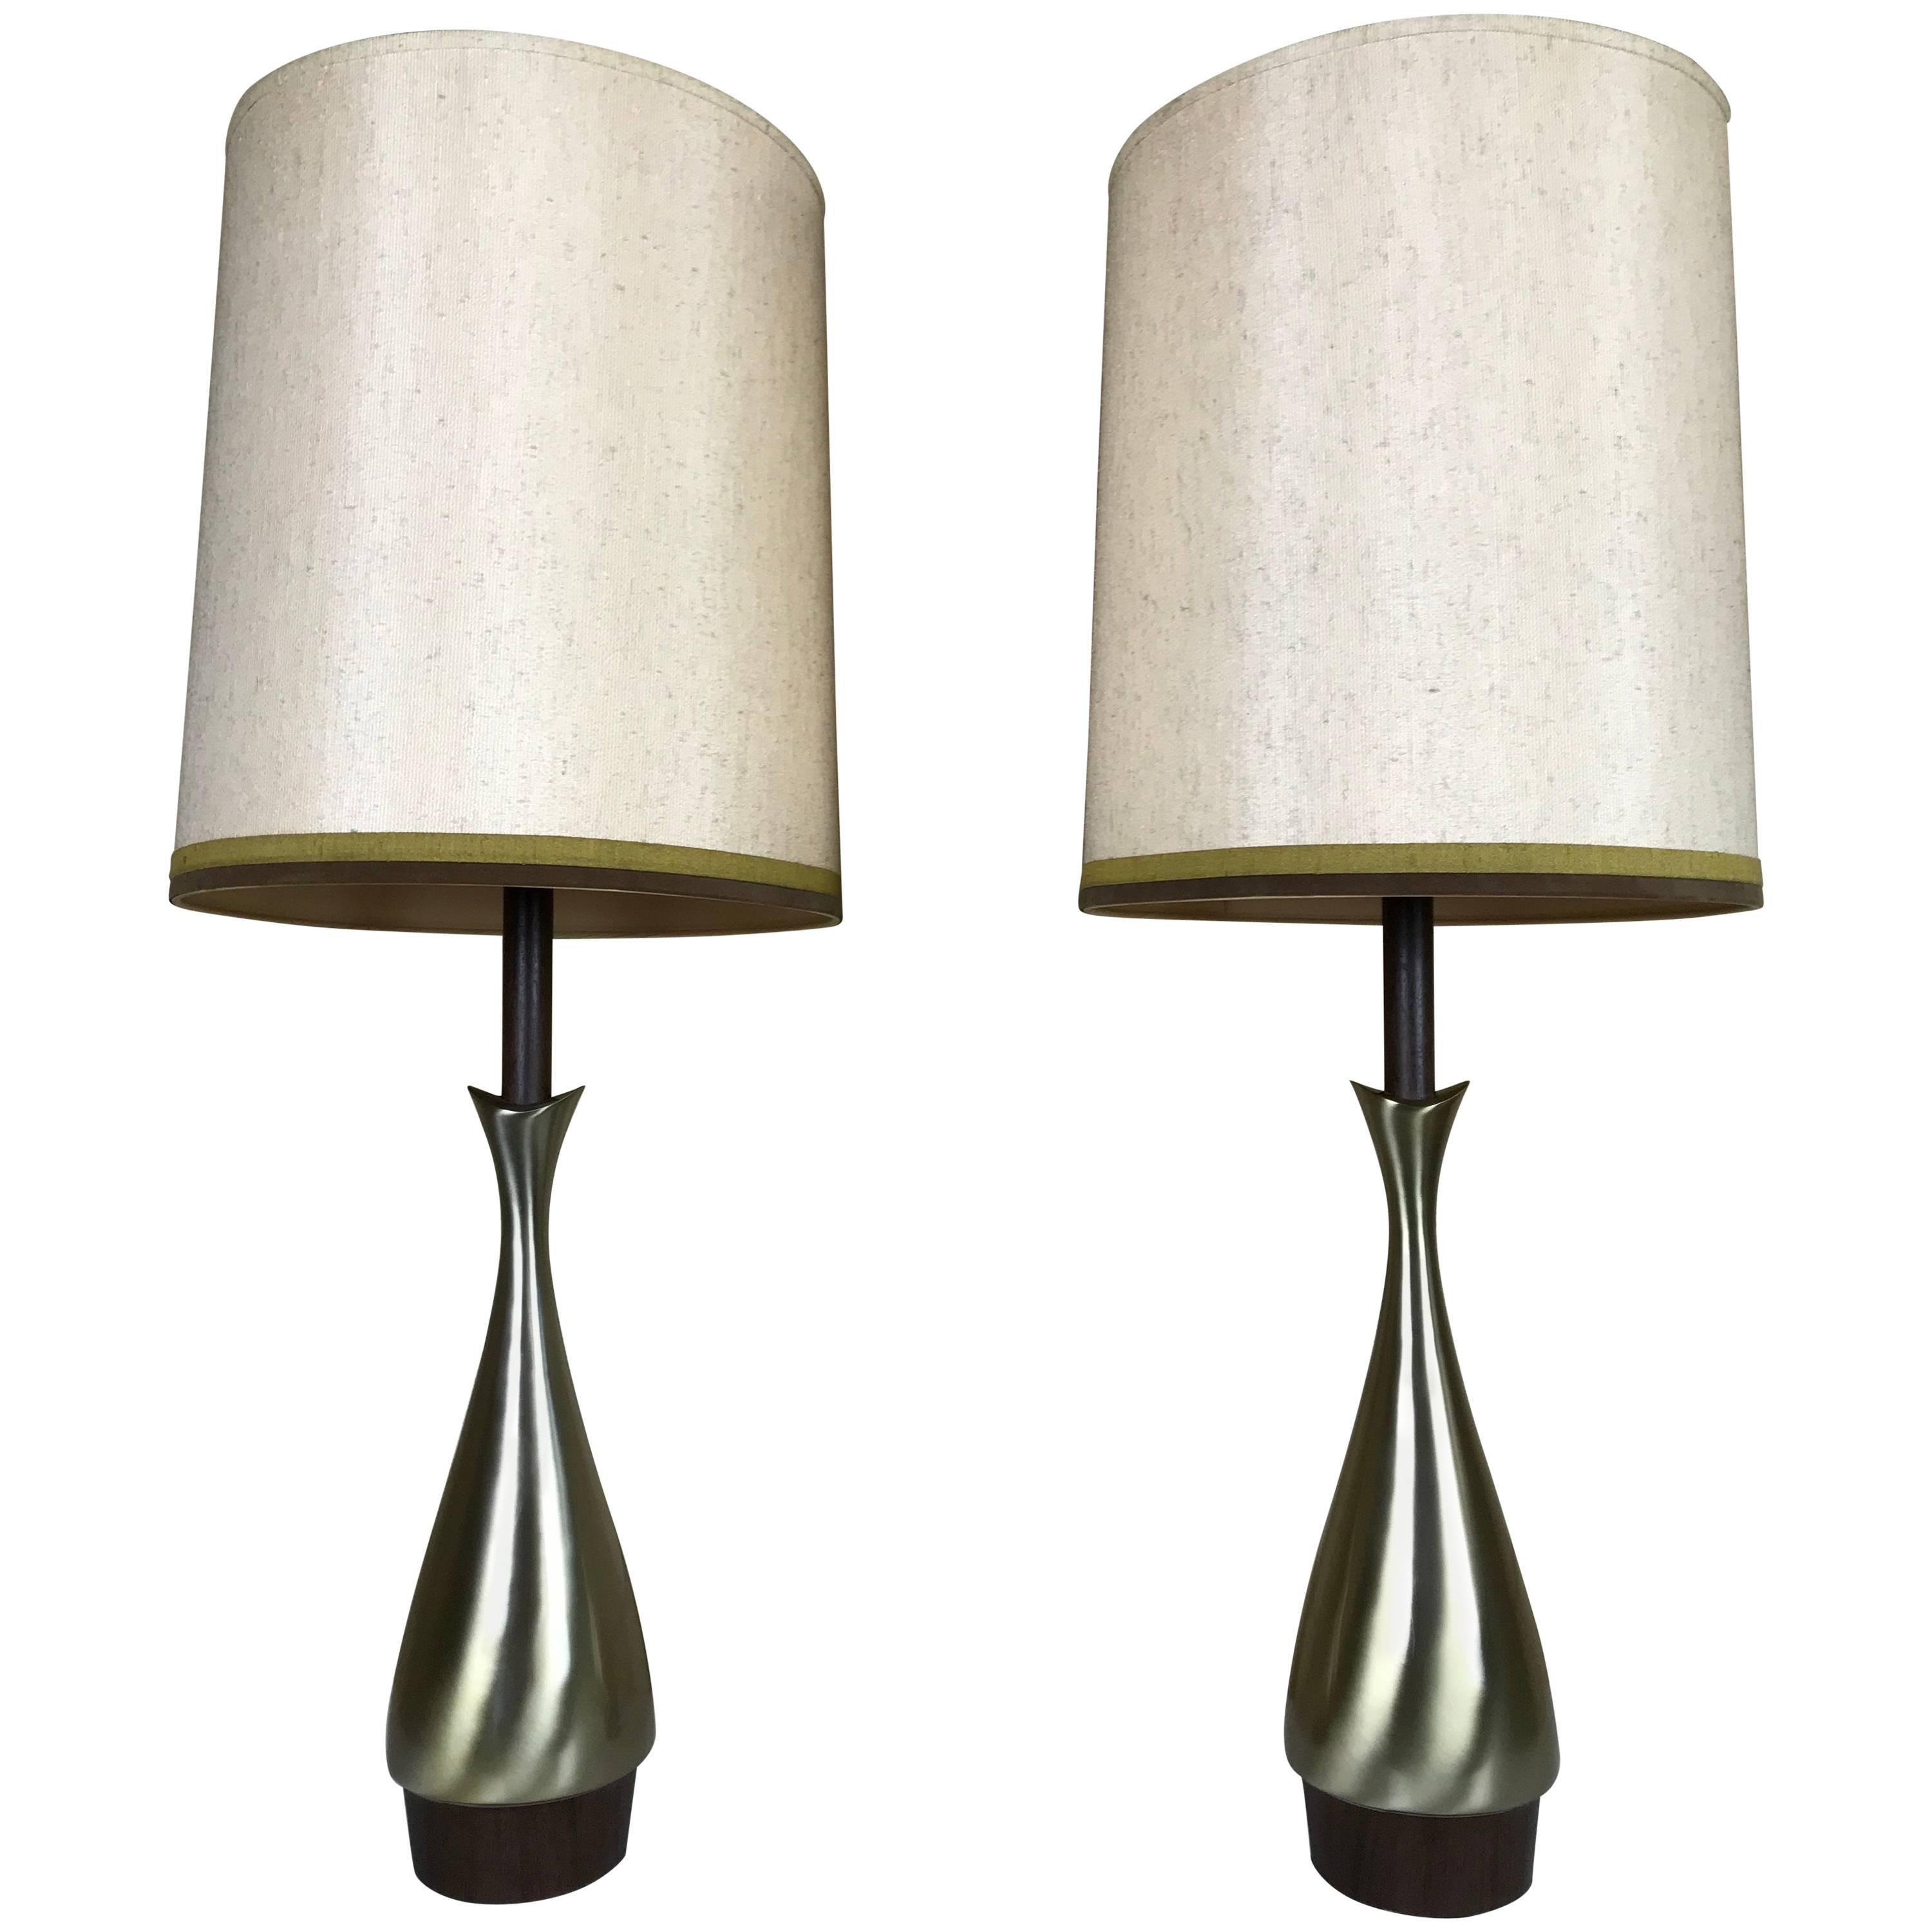 Pair of Modernist Fluted Brass and Wood Tables Lamps by Laurel Lamp Co.